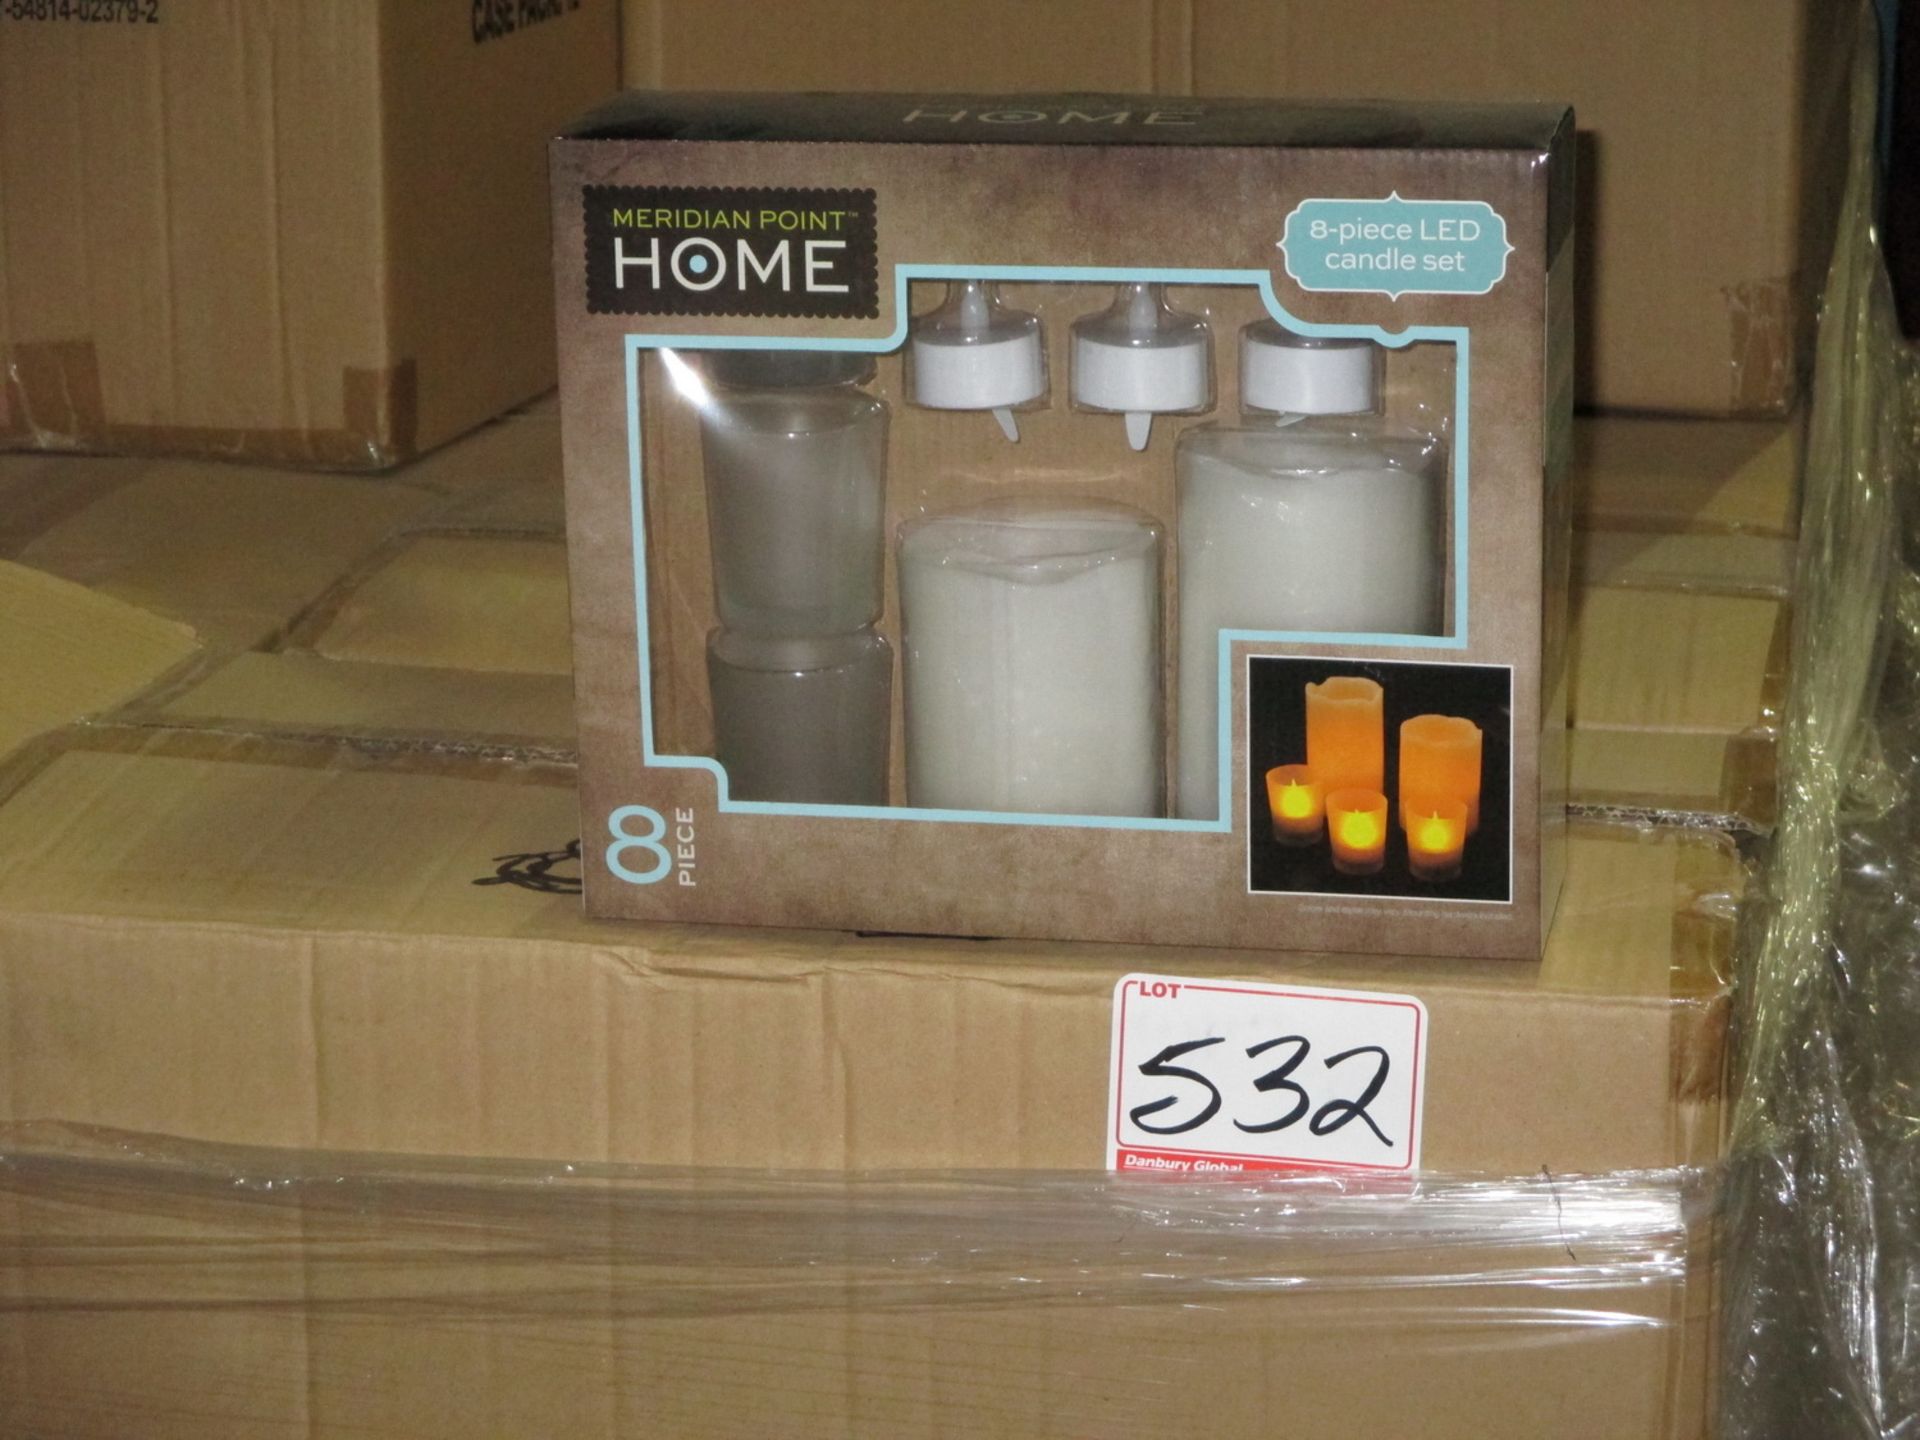 SETS - MERIDIAN POINT 8PC LED CANDLE SETS